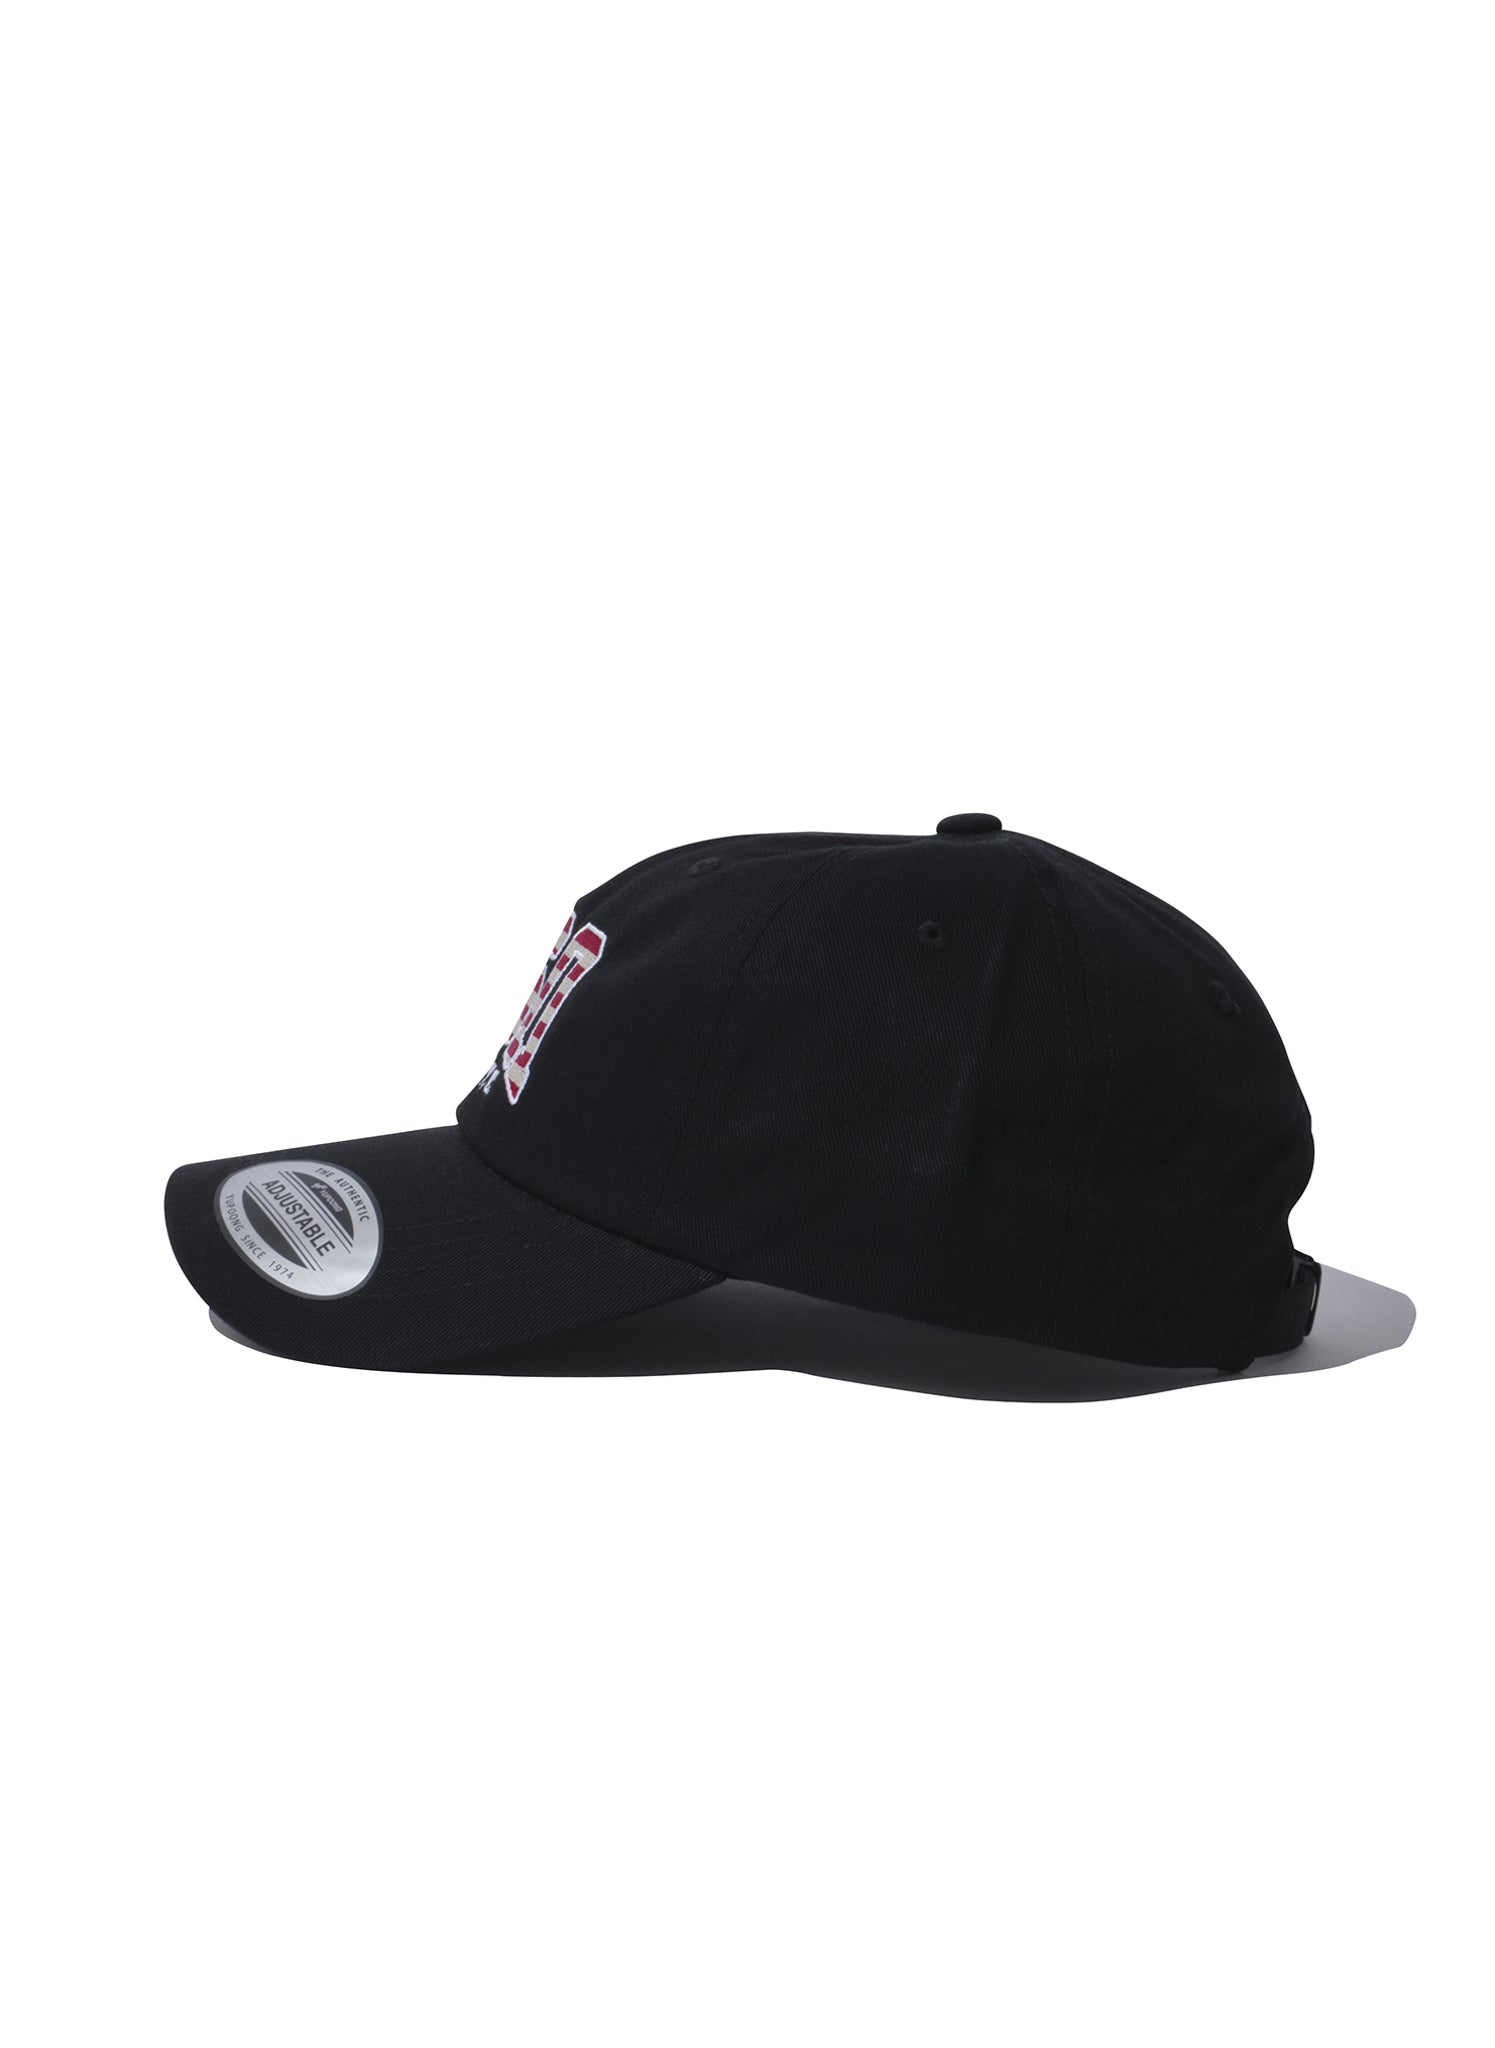 <span style="color: #f50b0b;">Last One</span> WILLY CHAVARRIA / WILLY CAP USA 2 BLACK